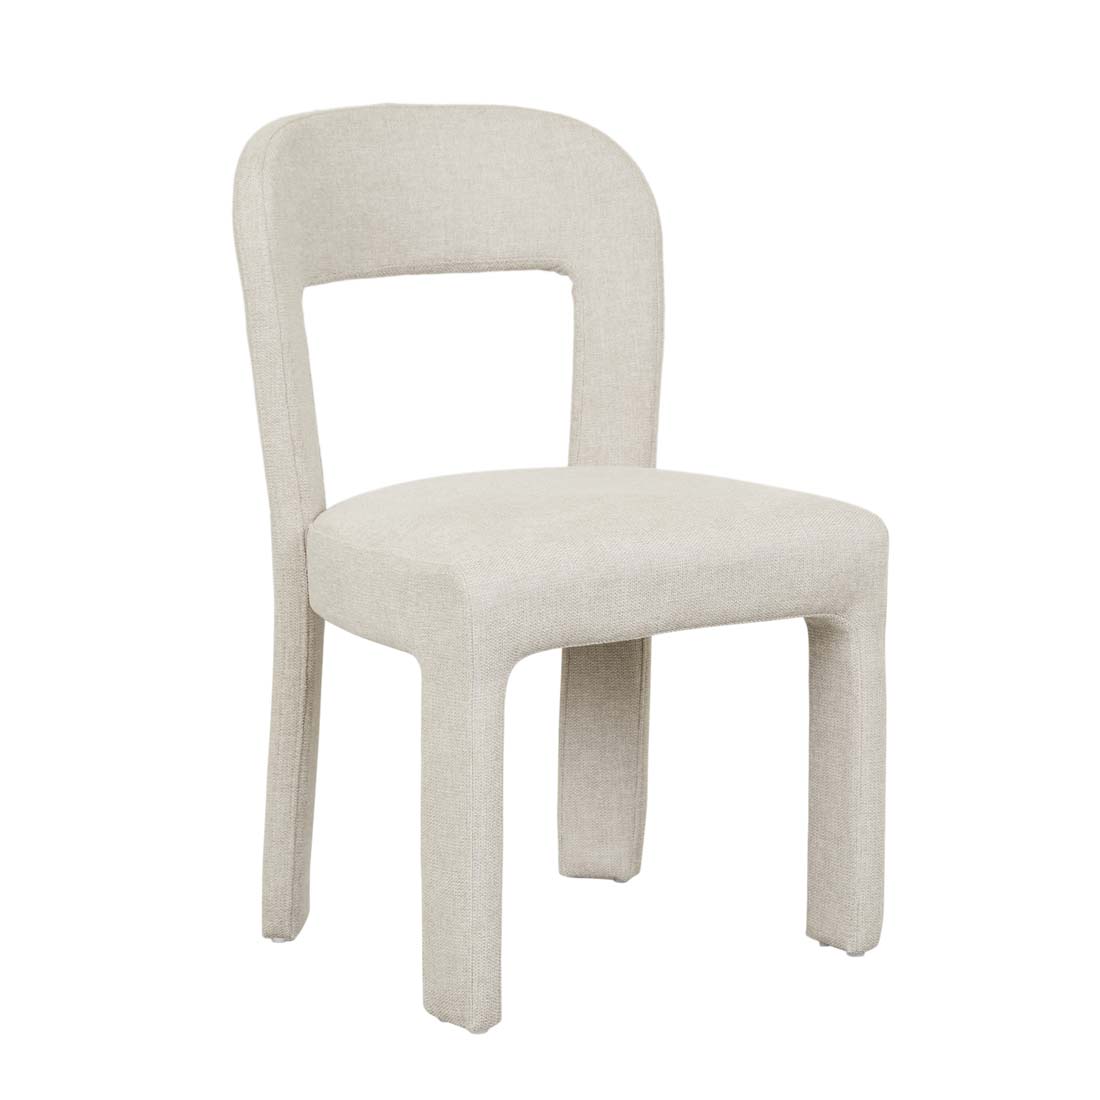 Eleanor Dining Chair image 23